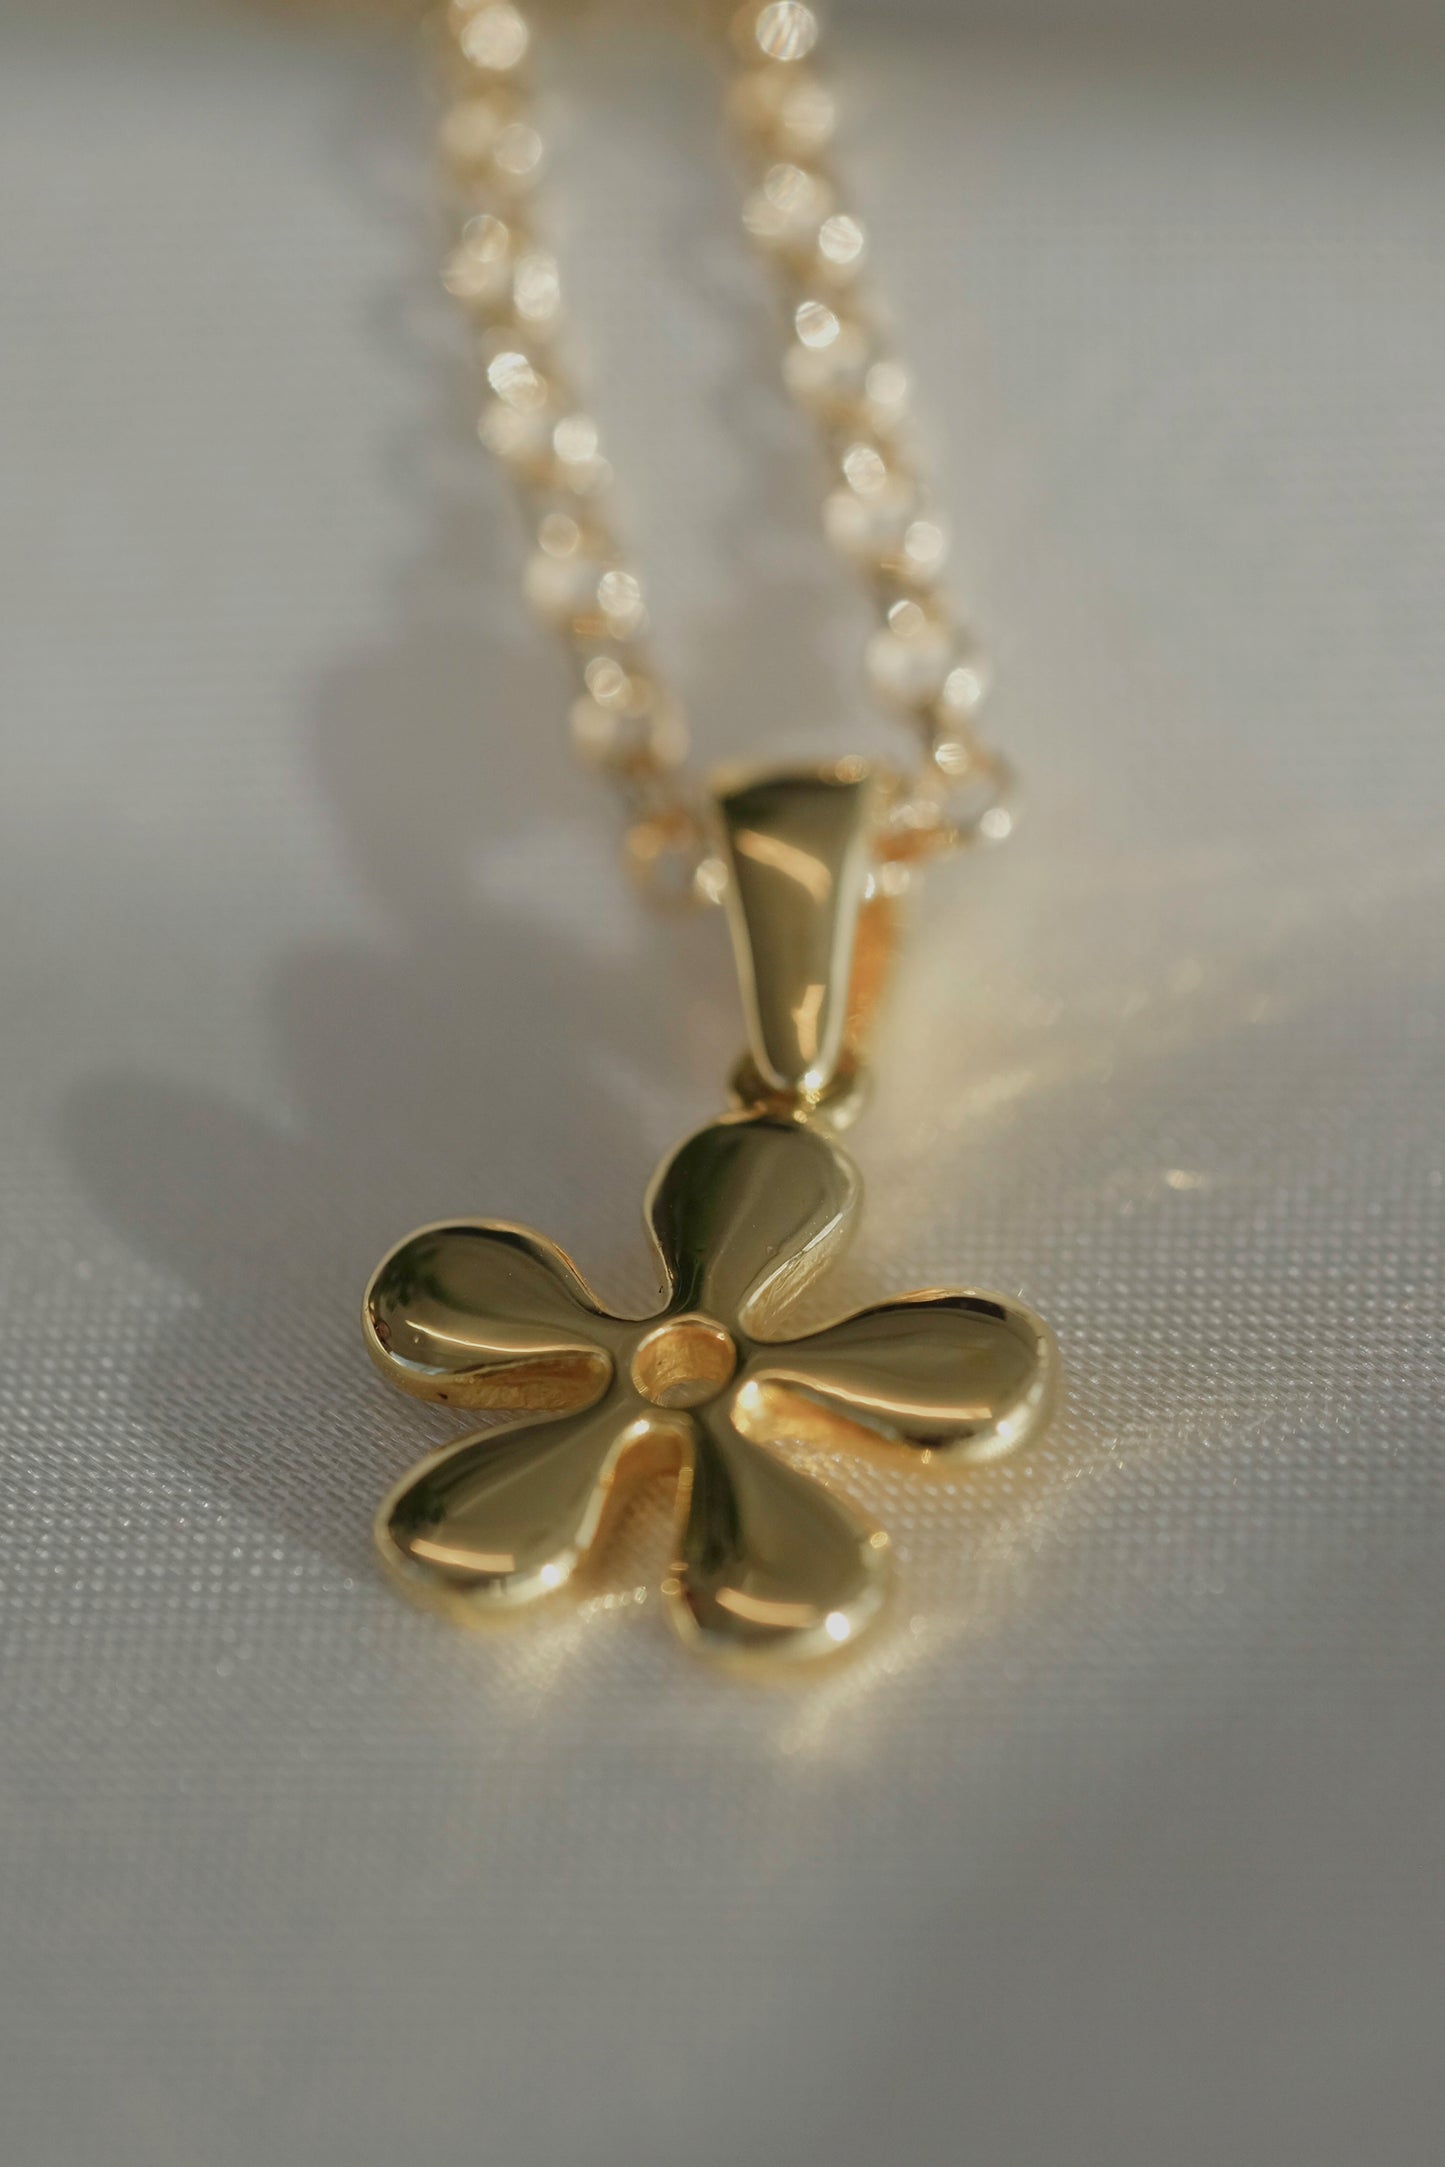 70's daisy charm gold-filled sterling silver